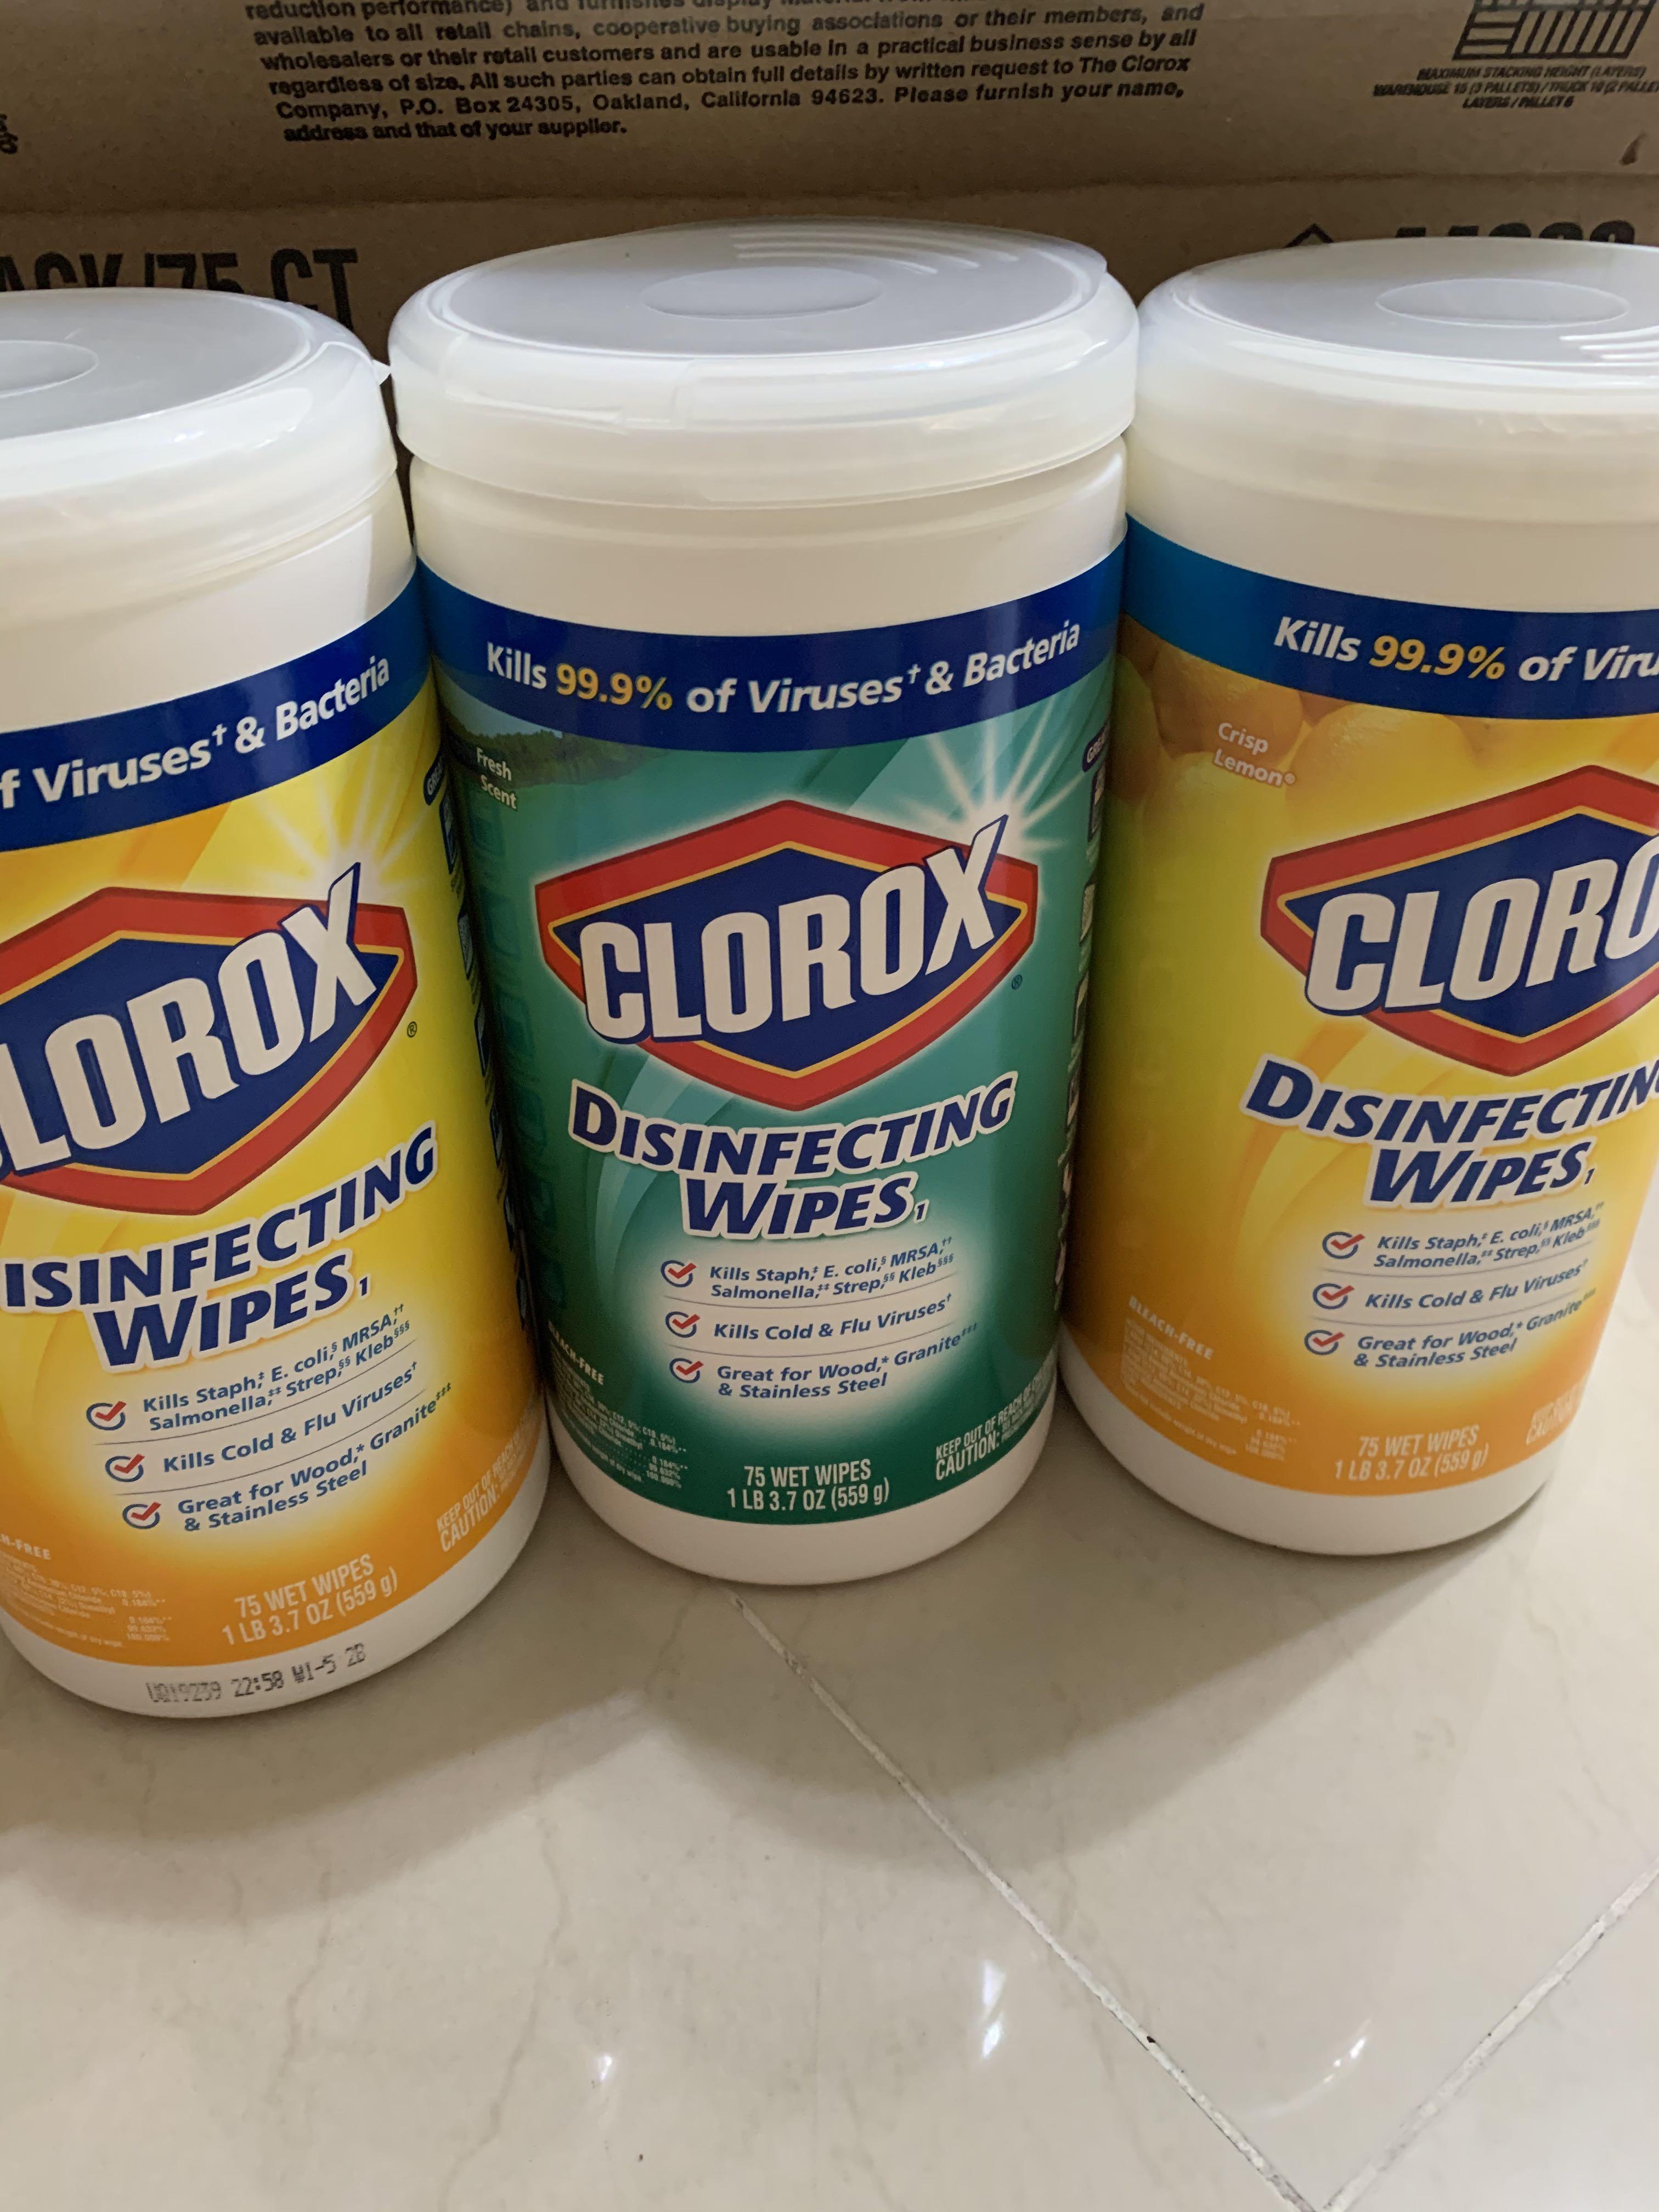 Pack Of 3 Clorox Disinfecting Wipes Bleach Free Cleaning Wipes 75 Count Pack Of 3 Total 225 Wipes Home Appliances Cleaning Laundry On Carousell